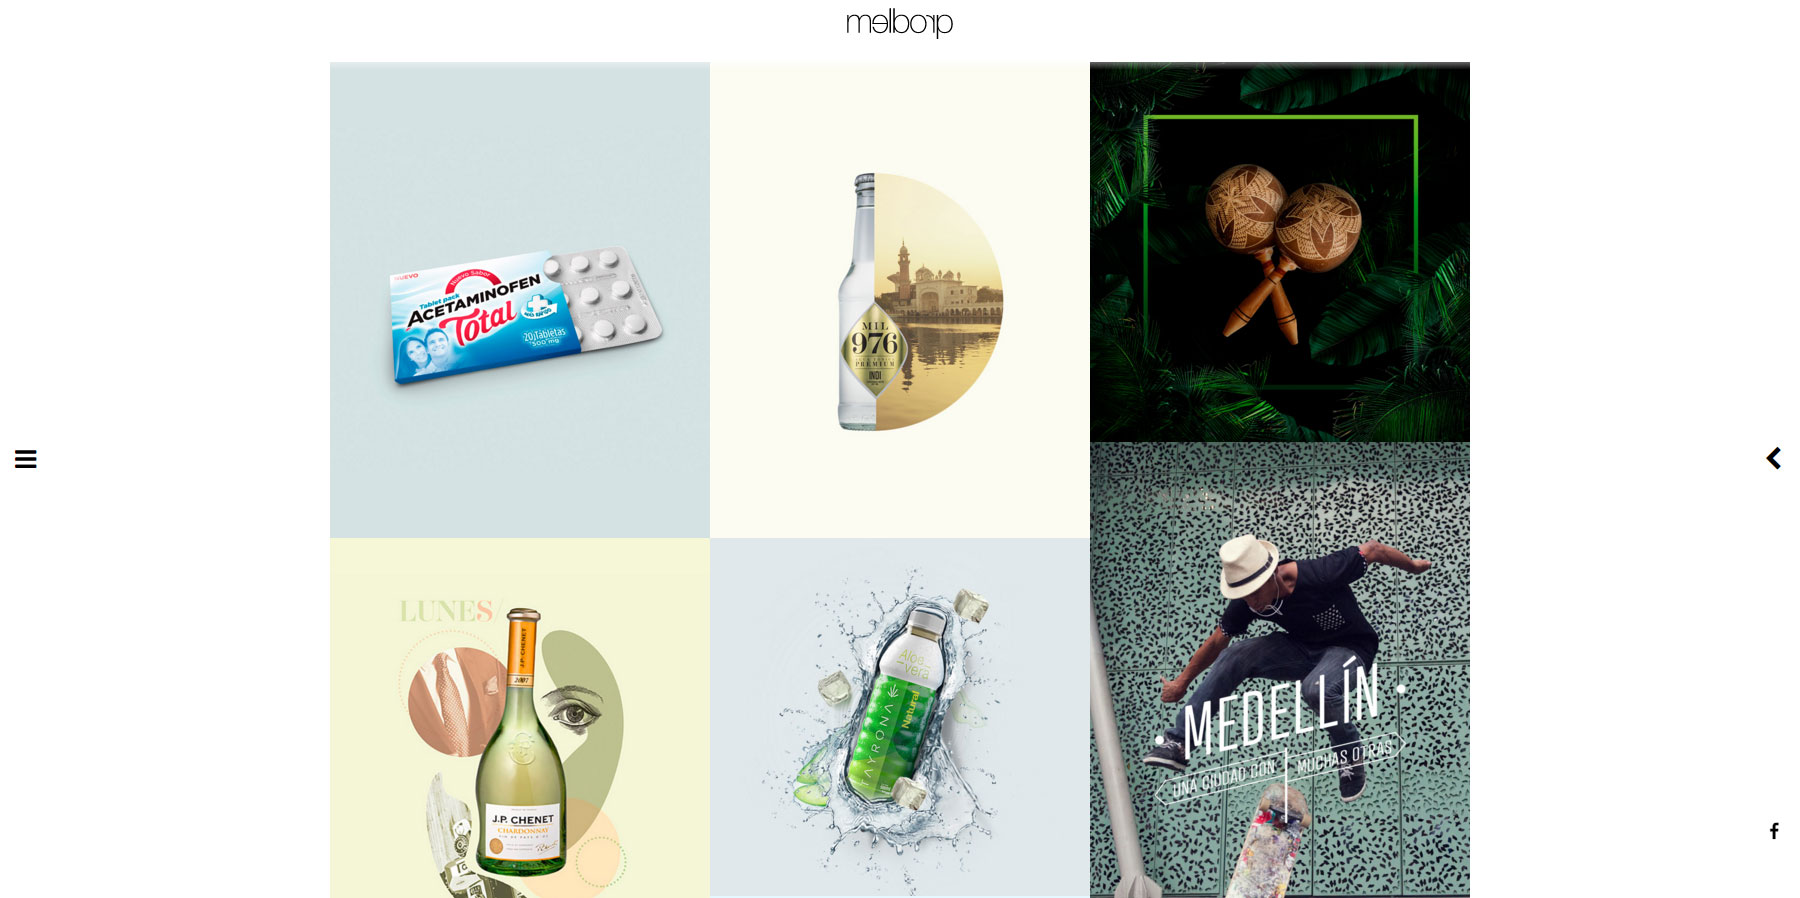 Melborp - Think Community - Website of the Day